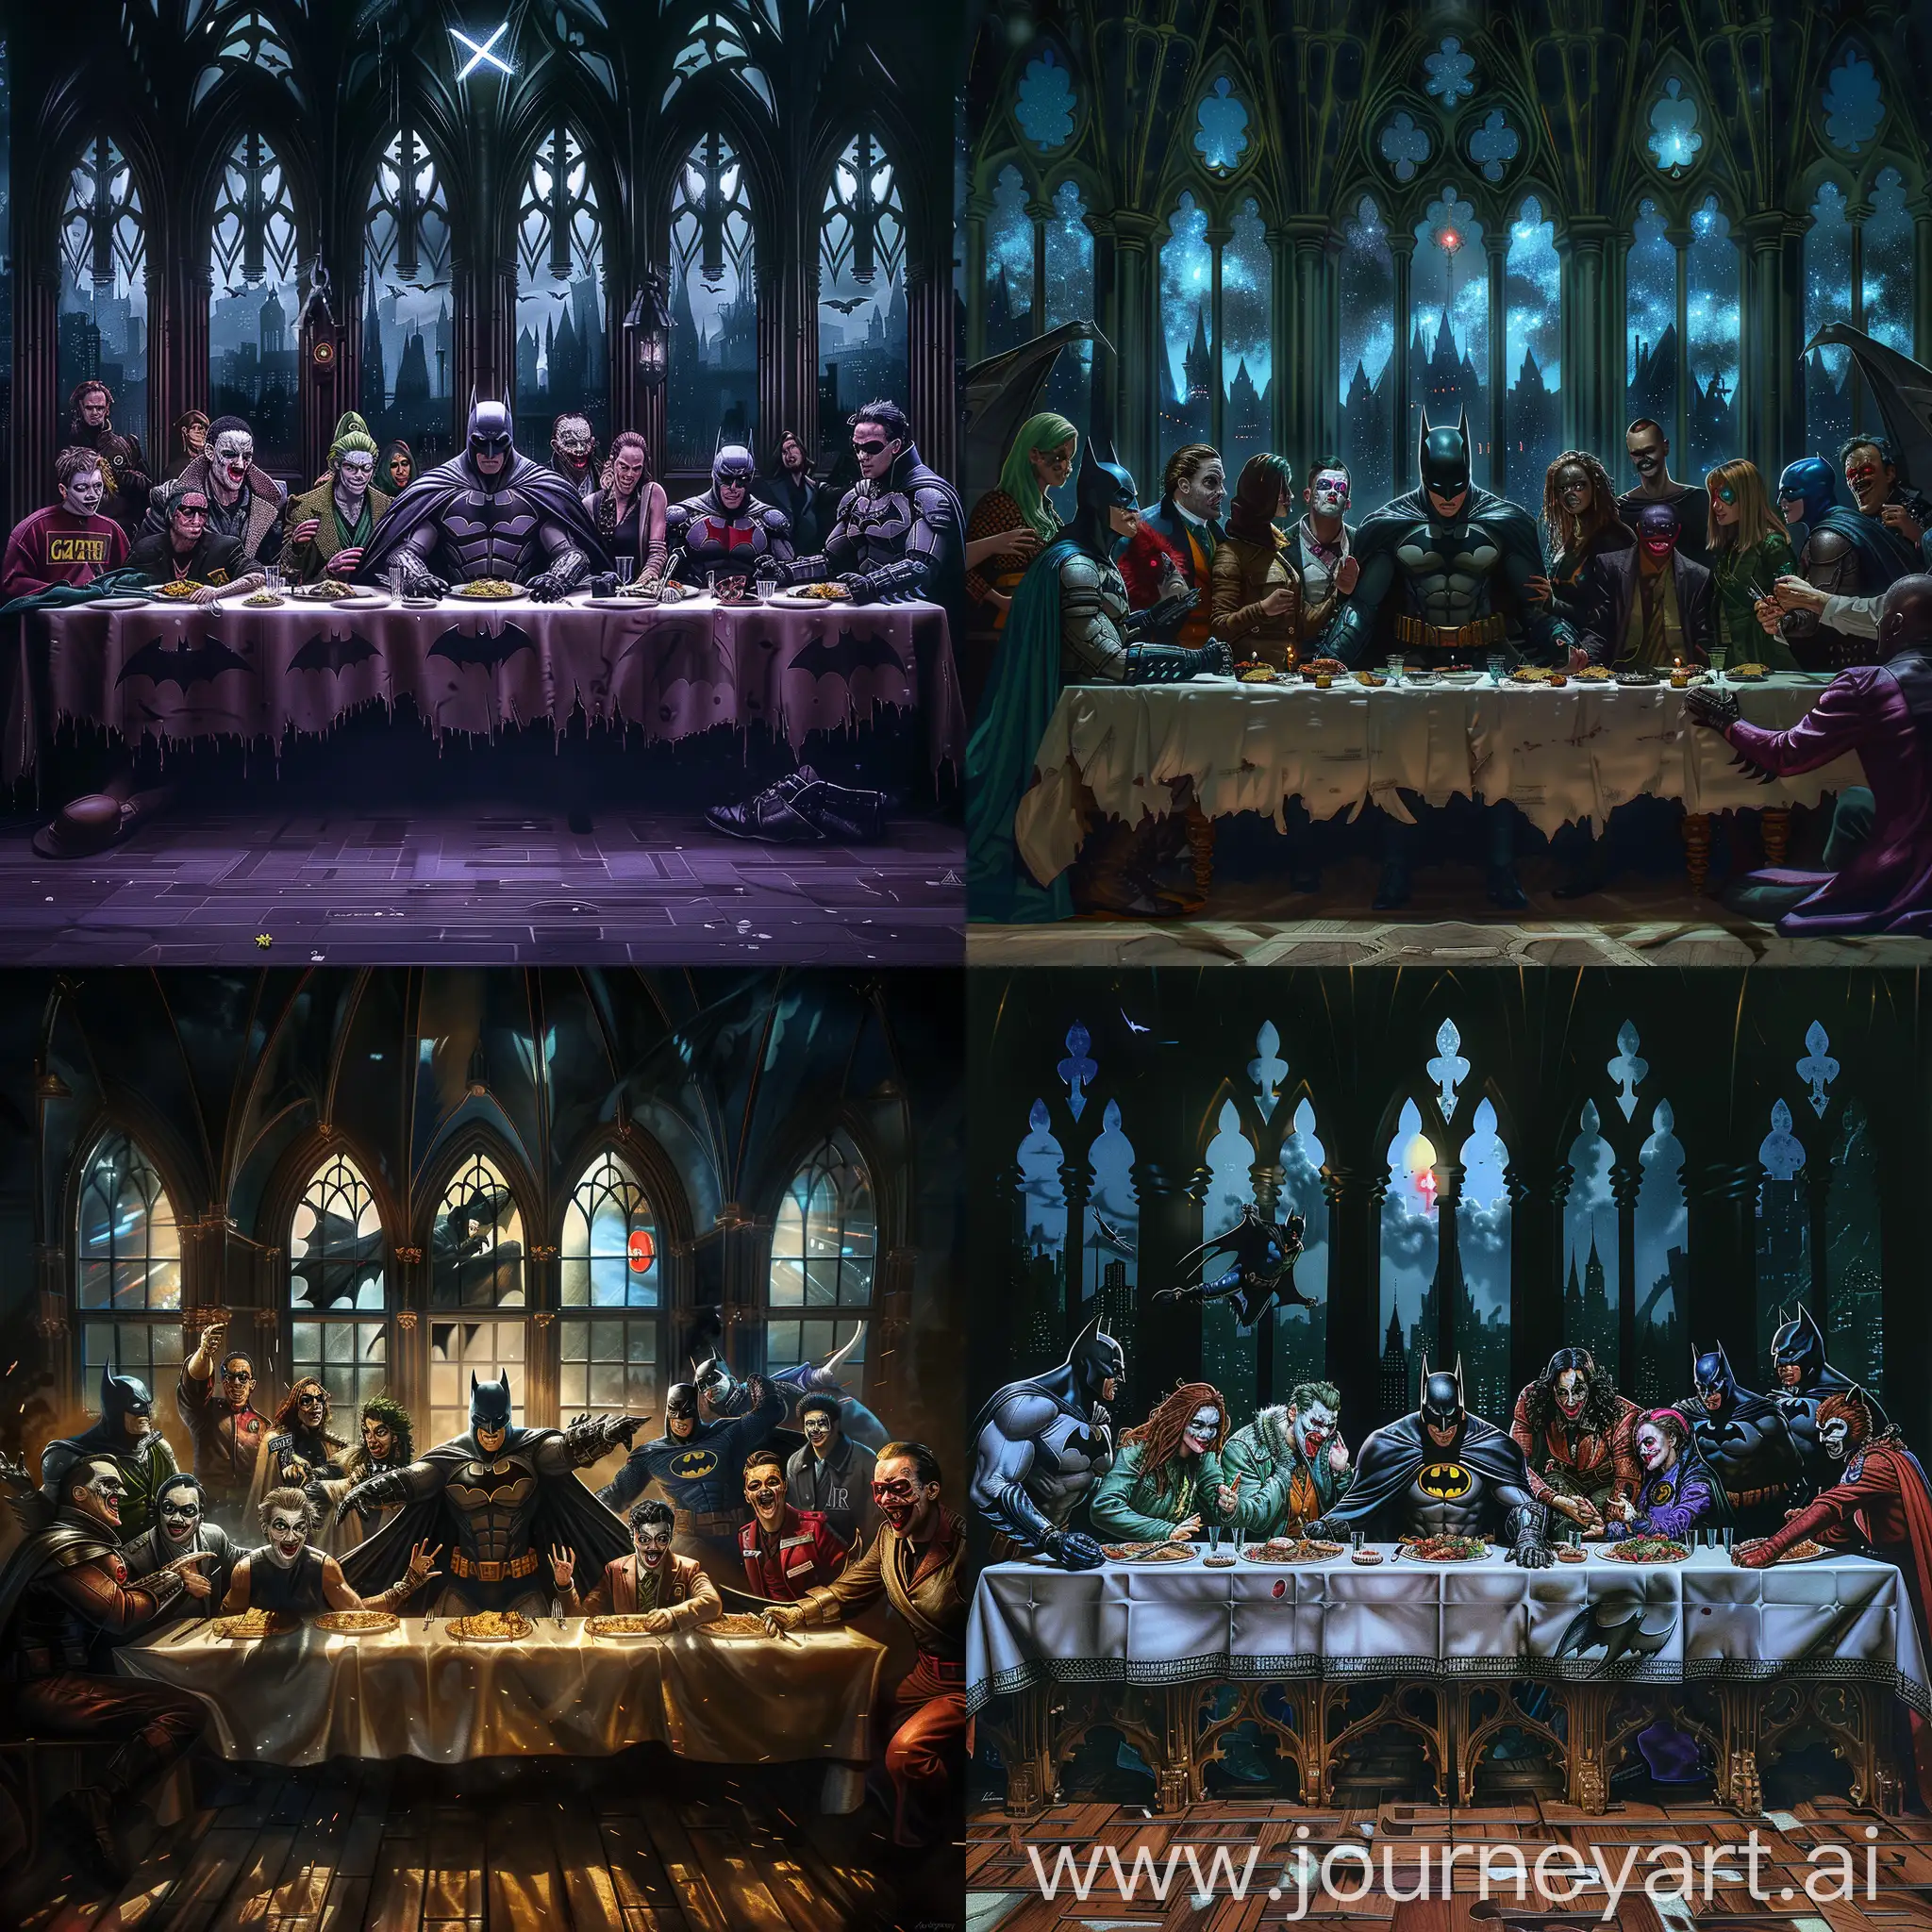 Photorealistic style, Gothic architecture, dramatic lighting. Batman as the central figure in the Last Supper scene, with Joker and Robin by his side. Other characters—Alfred, James Gordon, Harley Quinn, The Riddler, Penguin, Catwoman—distributed evenly along the table. Background features Gothic windows, a dark night with the Bat-Signal projected in the sky. --v 6.0 --style raw --ar 16:9